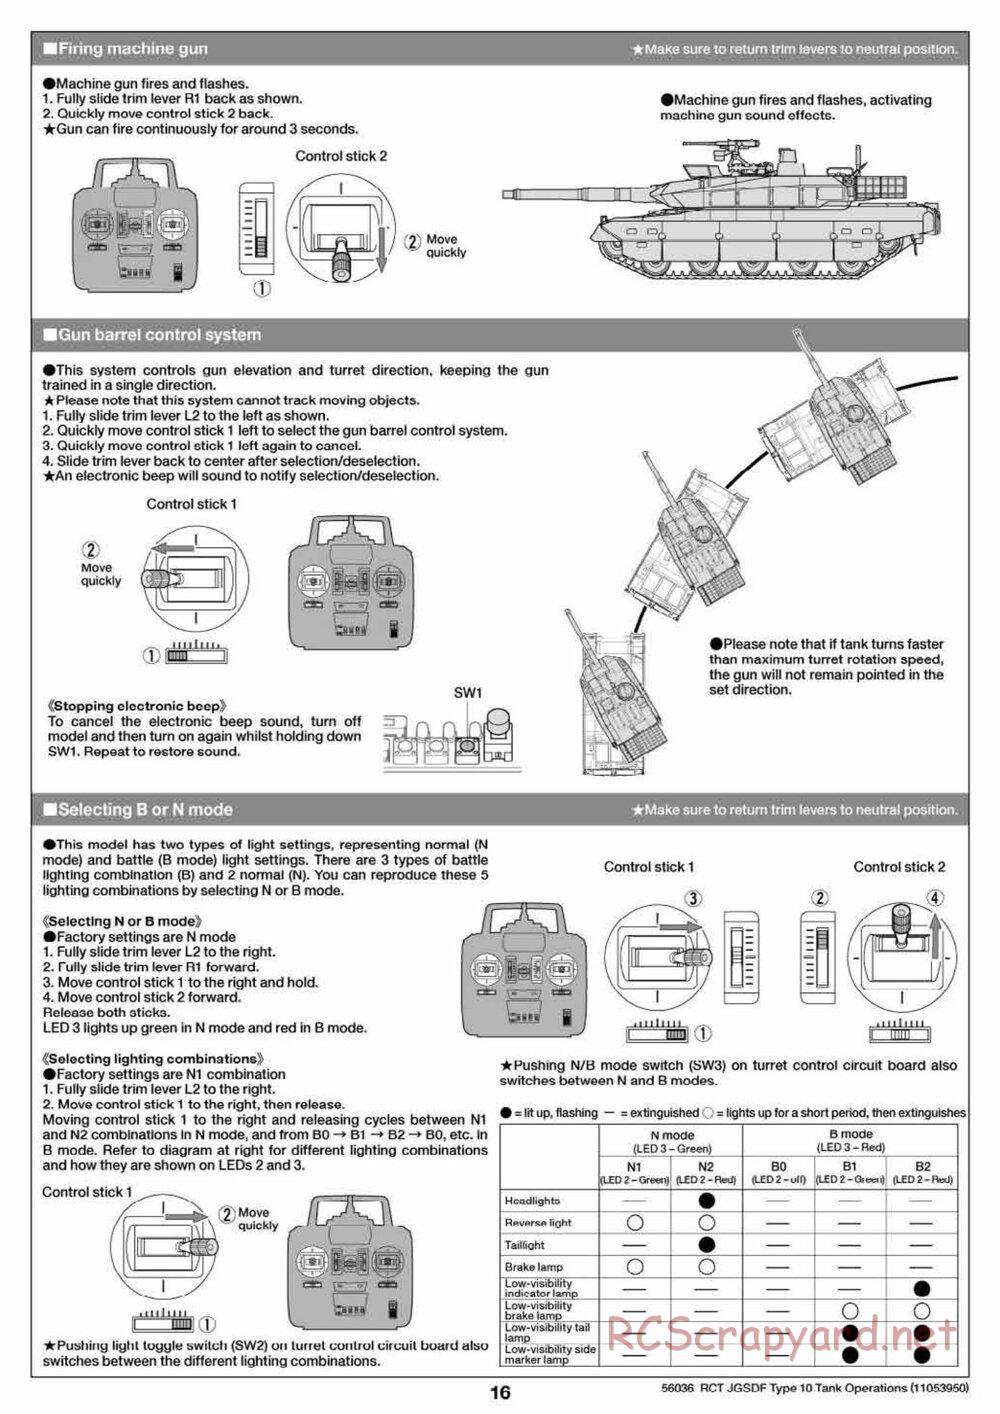 Tamiya - JGSDF Type 10 Tank - 1/16 Scale Chassis - Operation Manual - Page 6